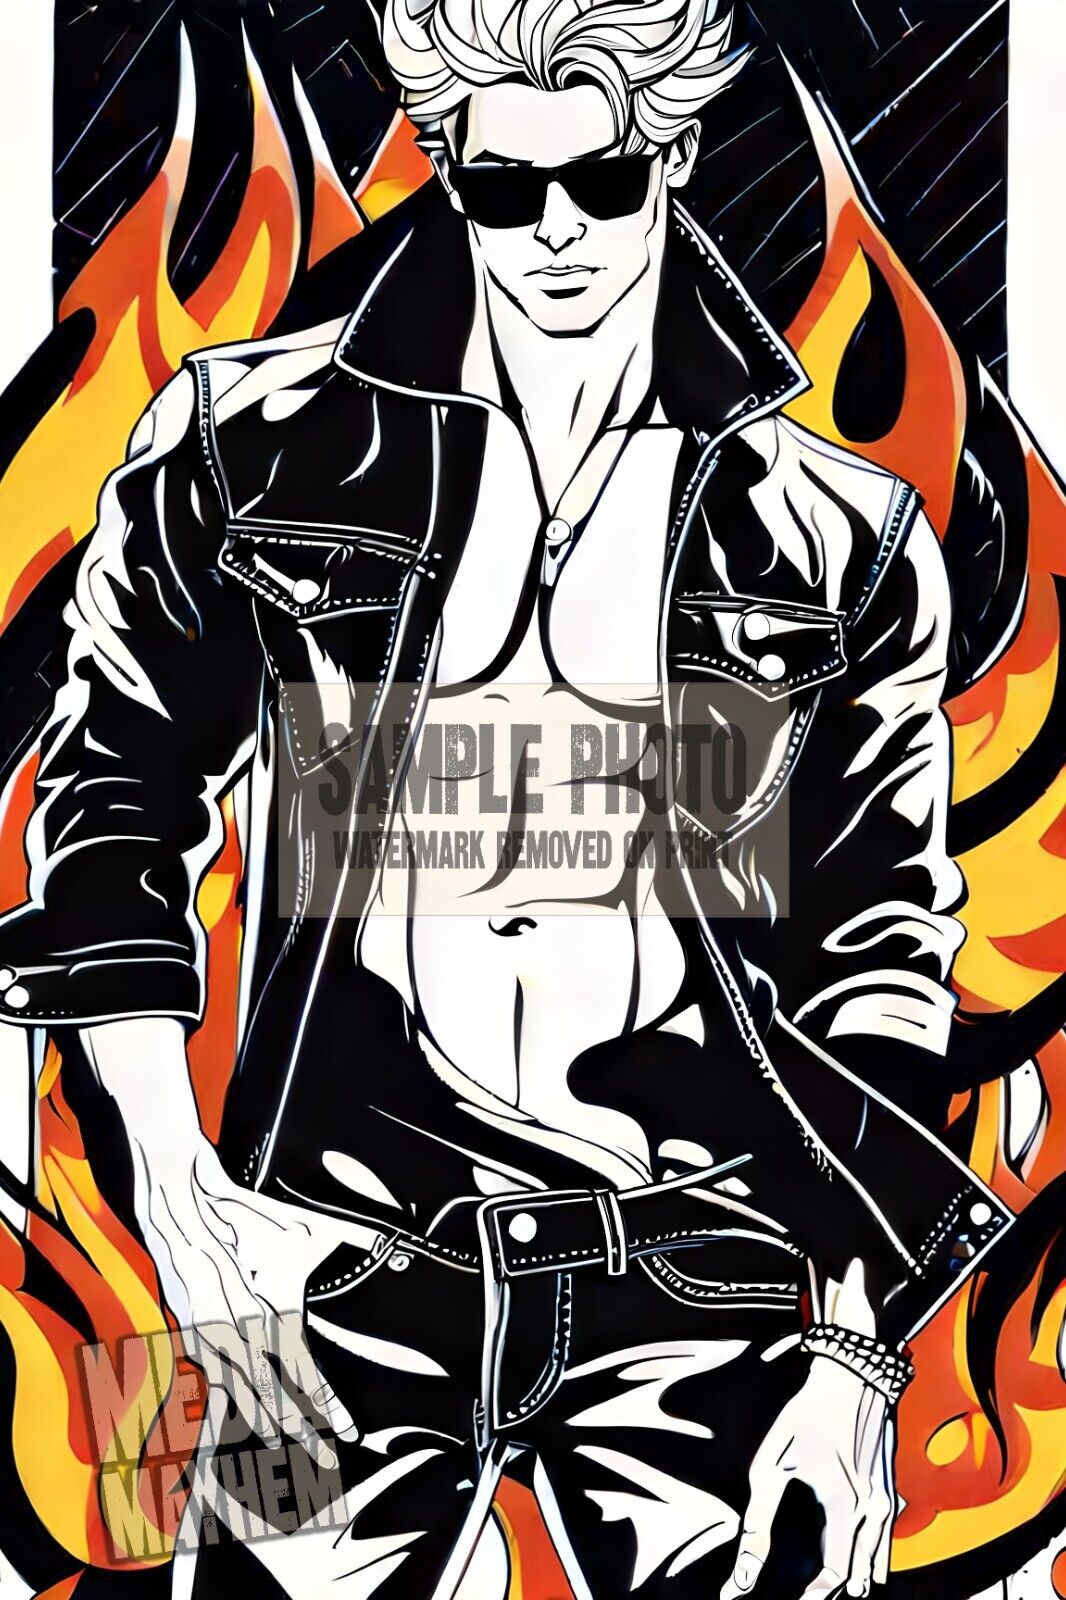 GAY ART PRINT - Hunky Leather Flames Guy Print 4x6 Gay Interest Photo #1173